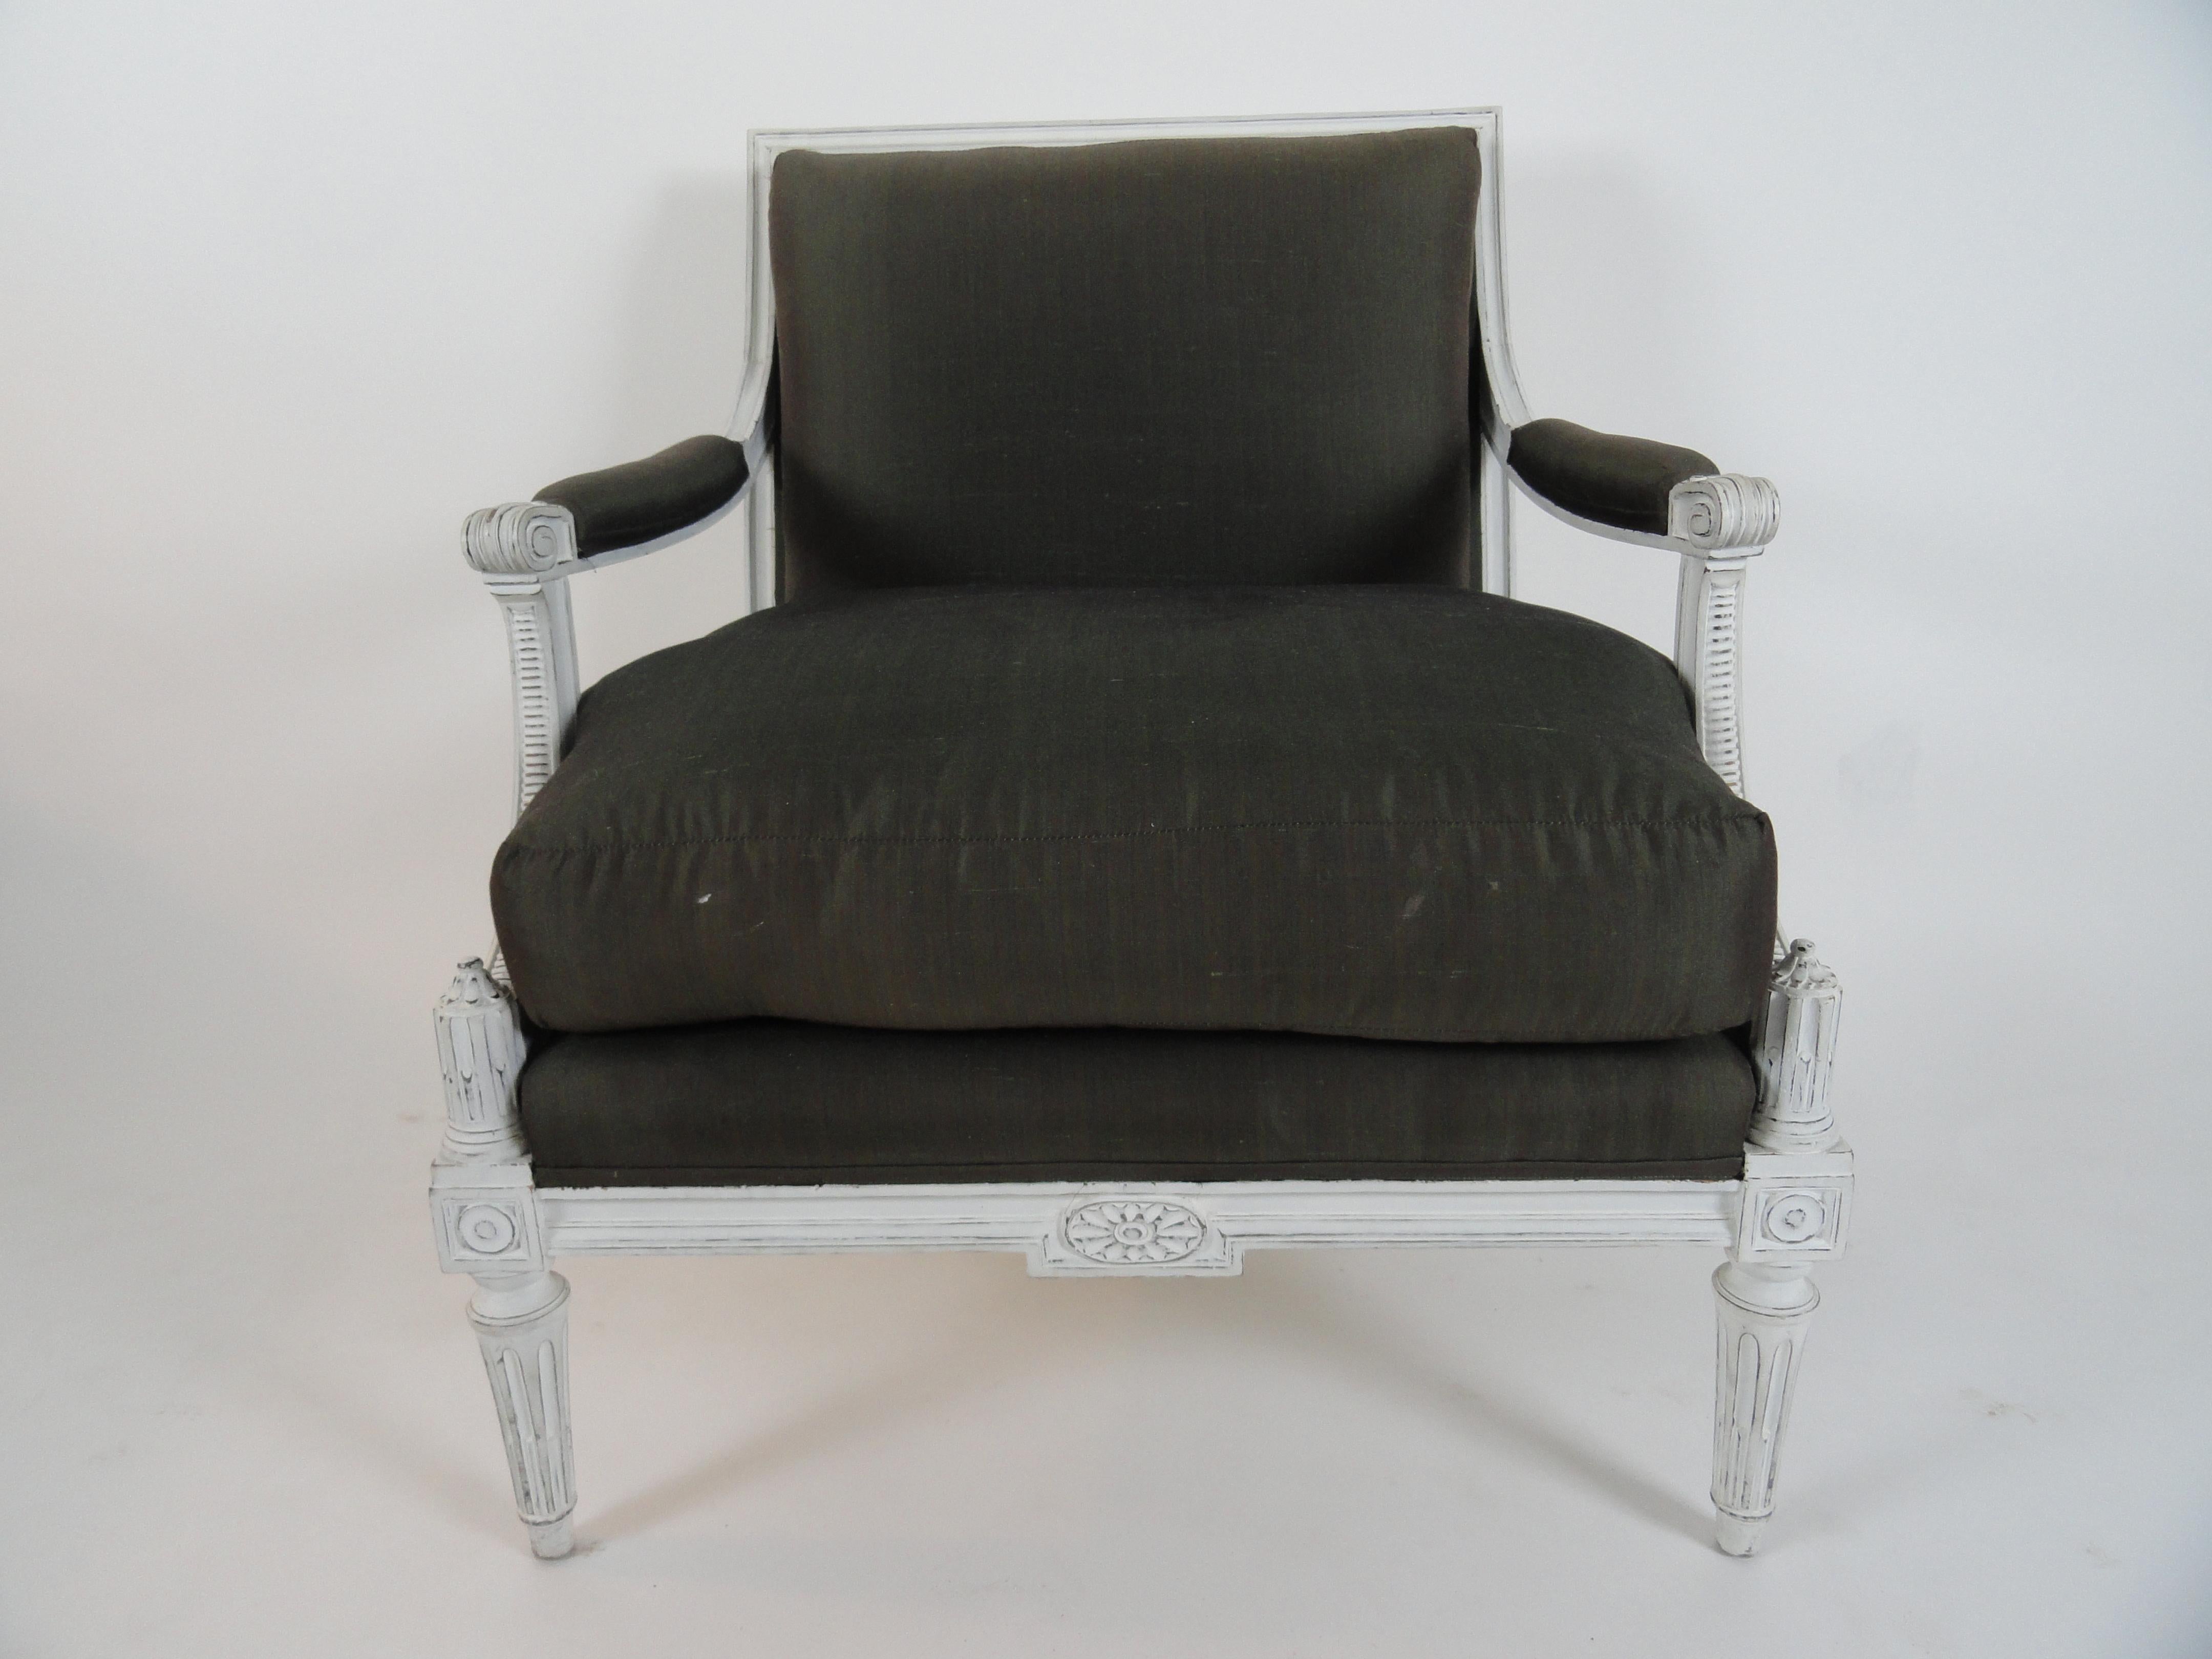 Maison Jansen Louis XVI style armchair or fauteuil. Wood painted white. Newer, distress finish. Upholstered in Henry Calvin Athena taffeta (50% silk, 50% cotton). Comfortable.